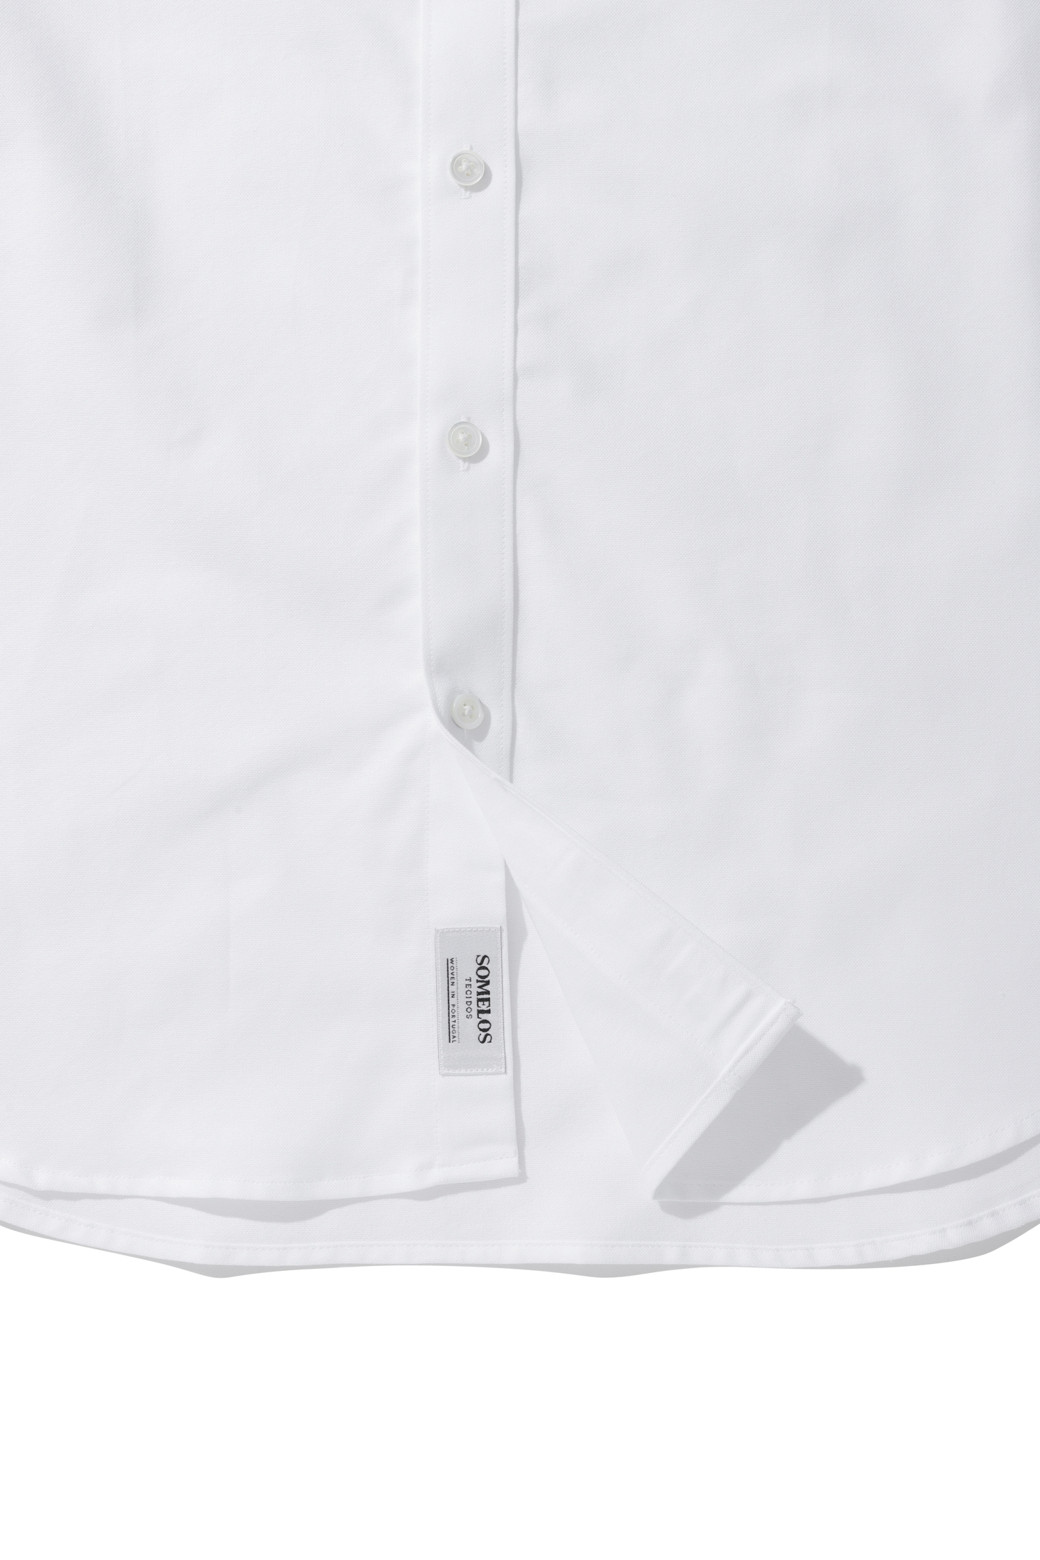 somelos new classic collar dress shirts_CUSTOMELLOW